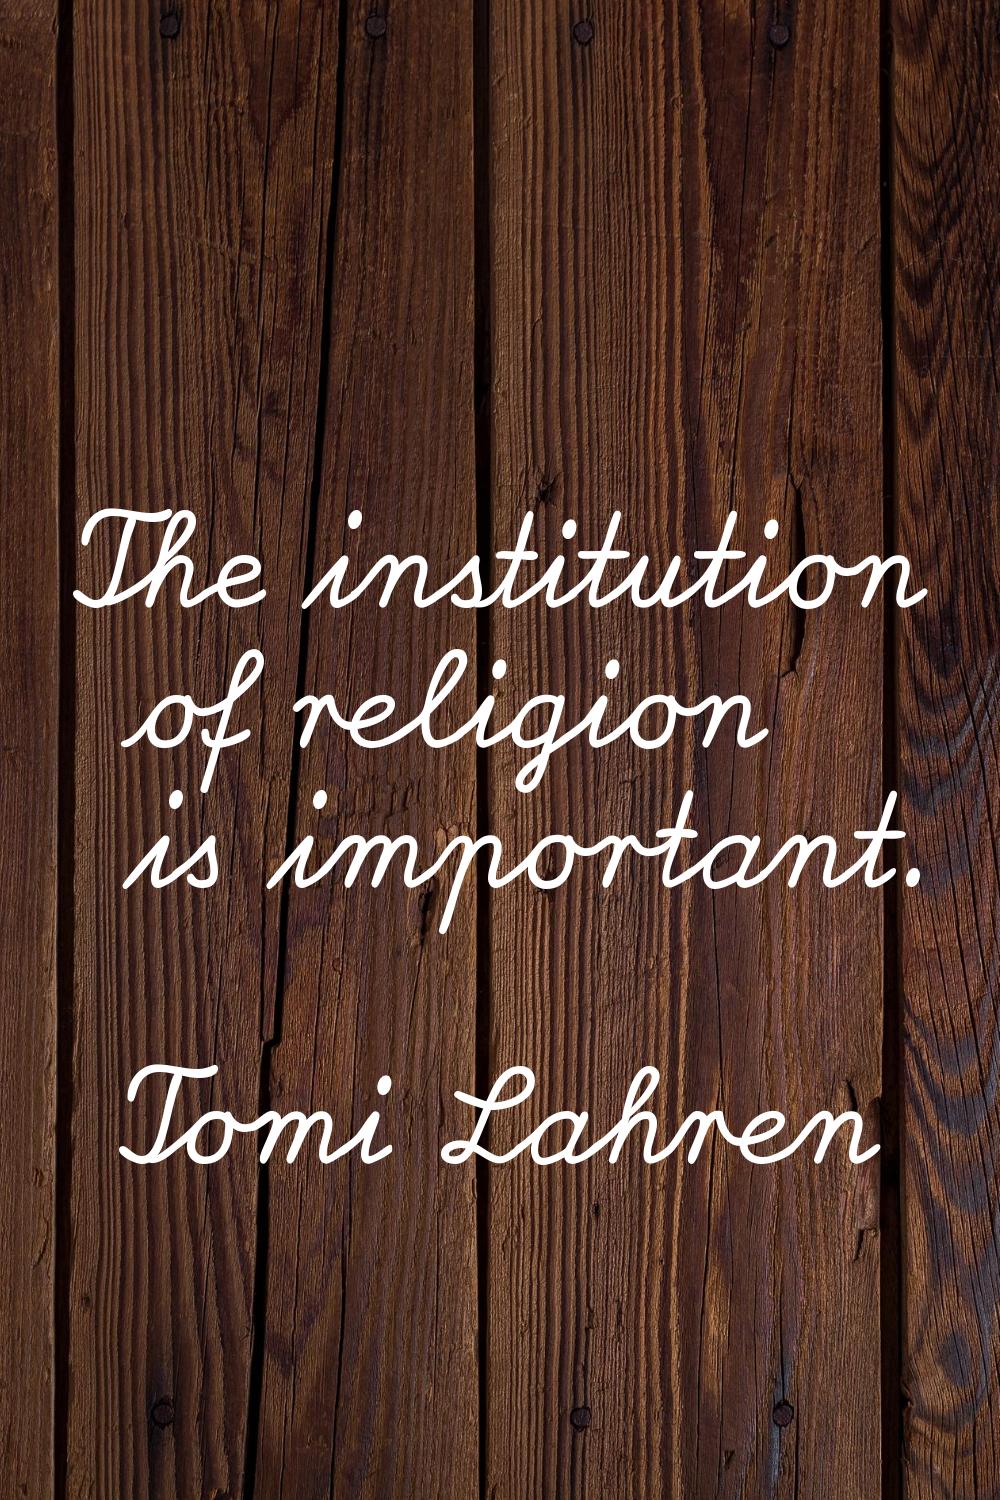 The institution of religion is important.